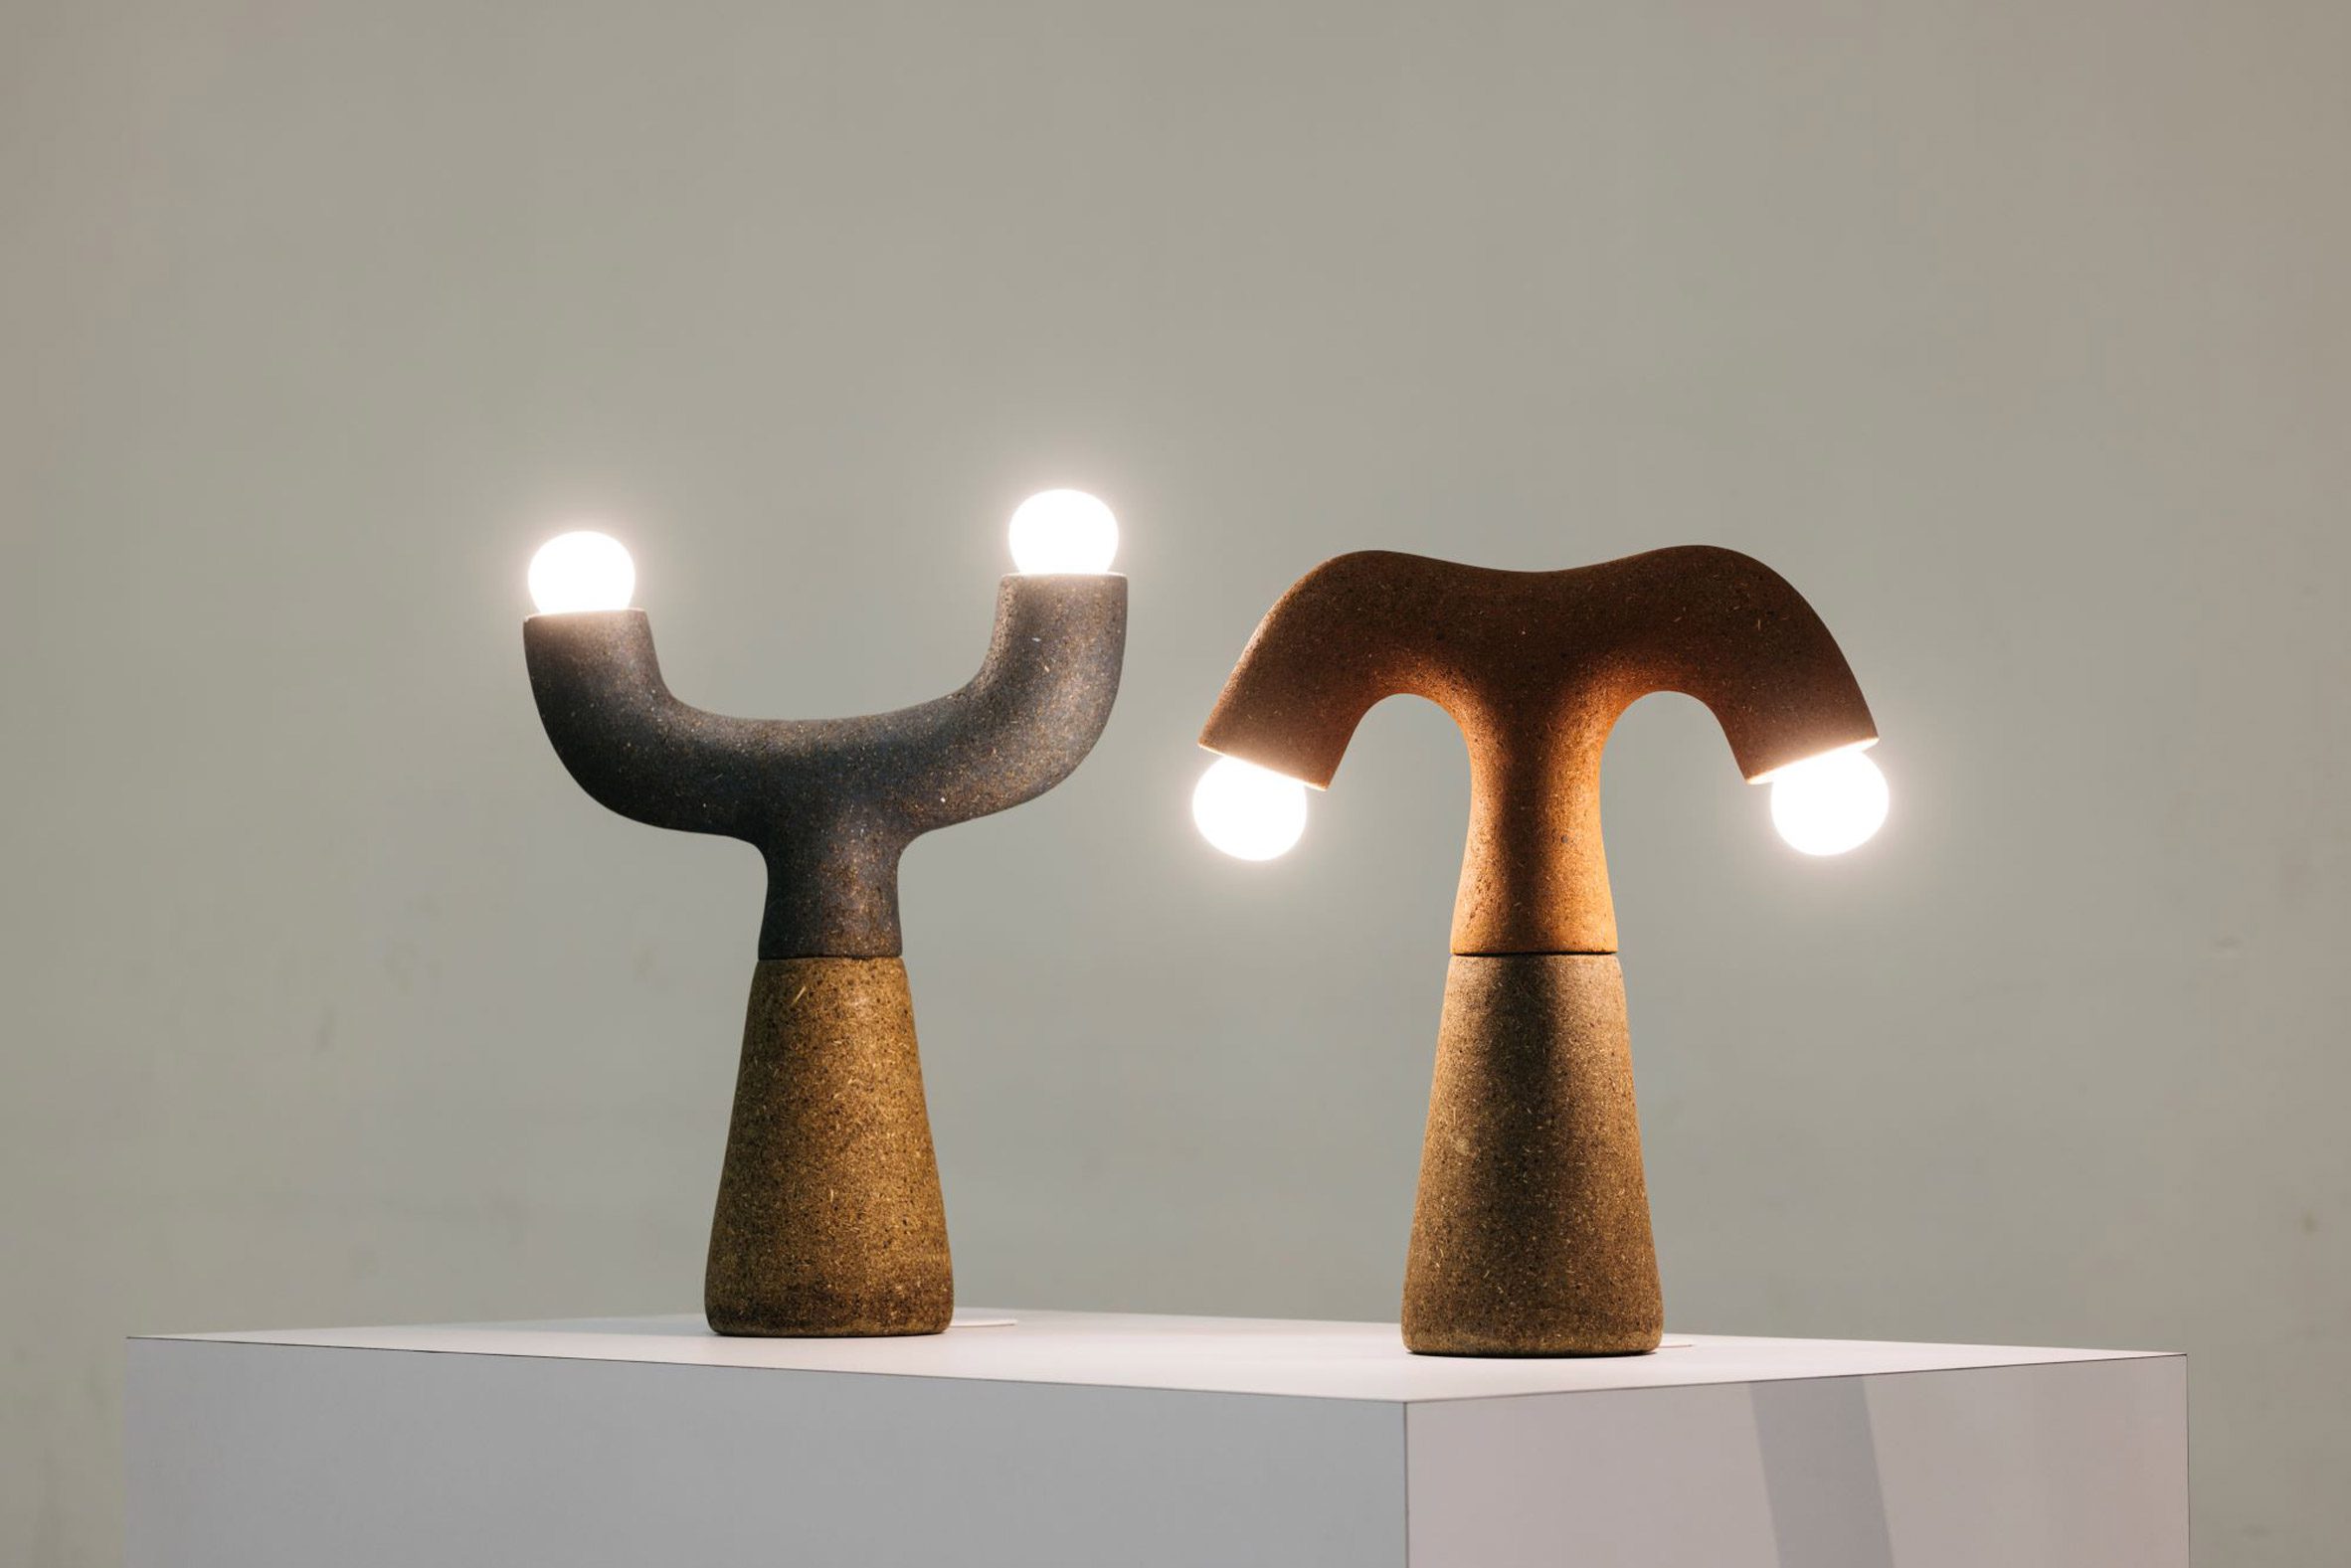 Two lamps on a plinth